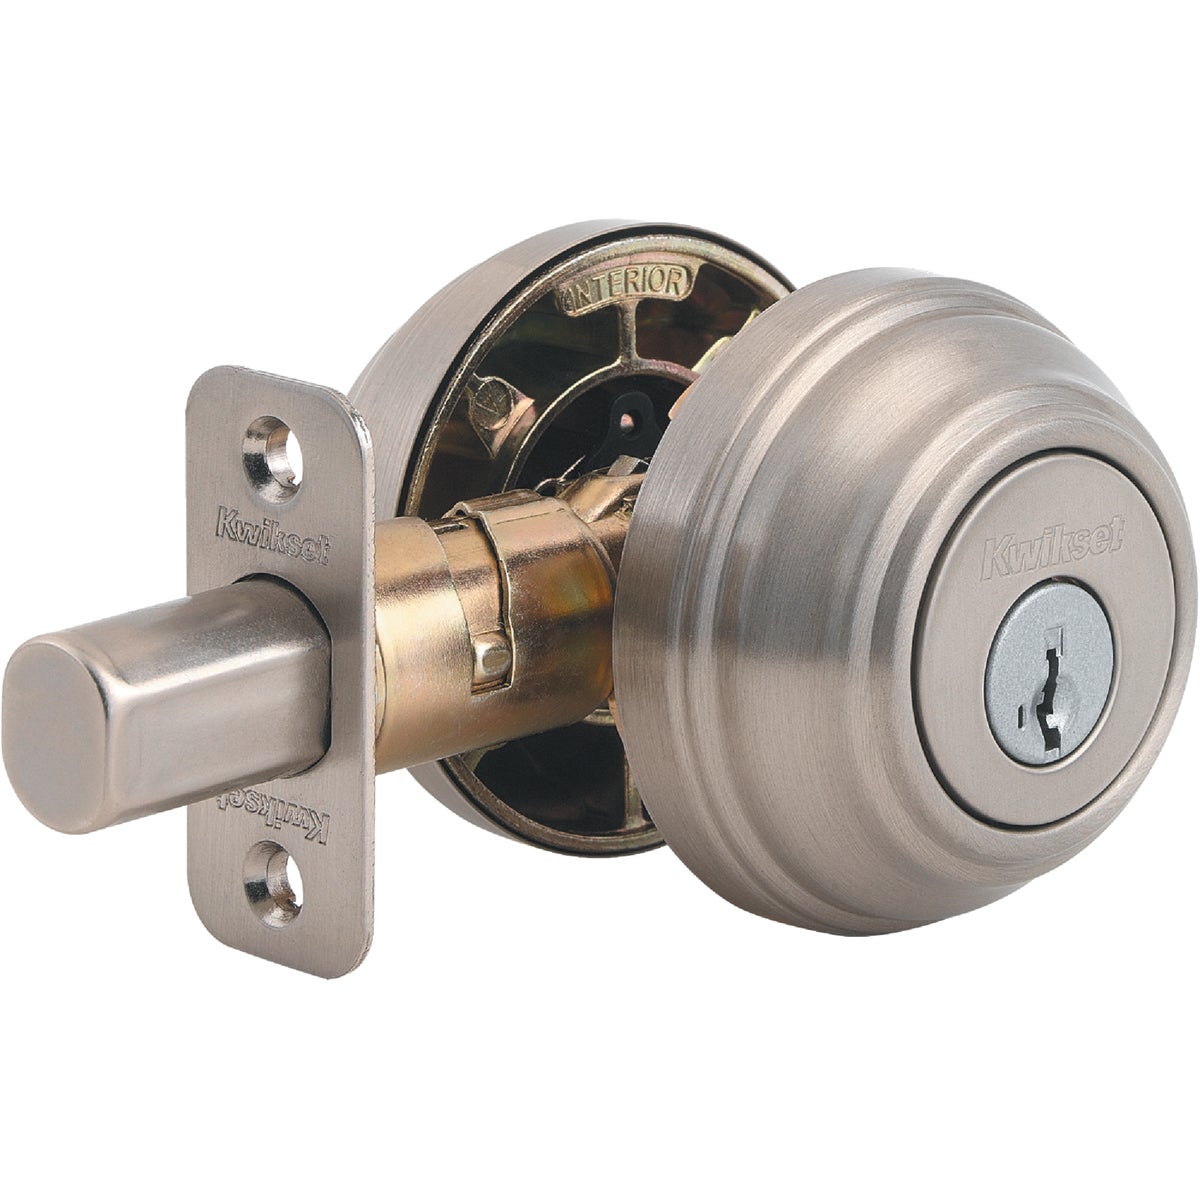 Item 207421, Grade 1 security double deadbolt with SmartKey cylinder.